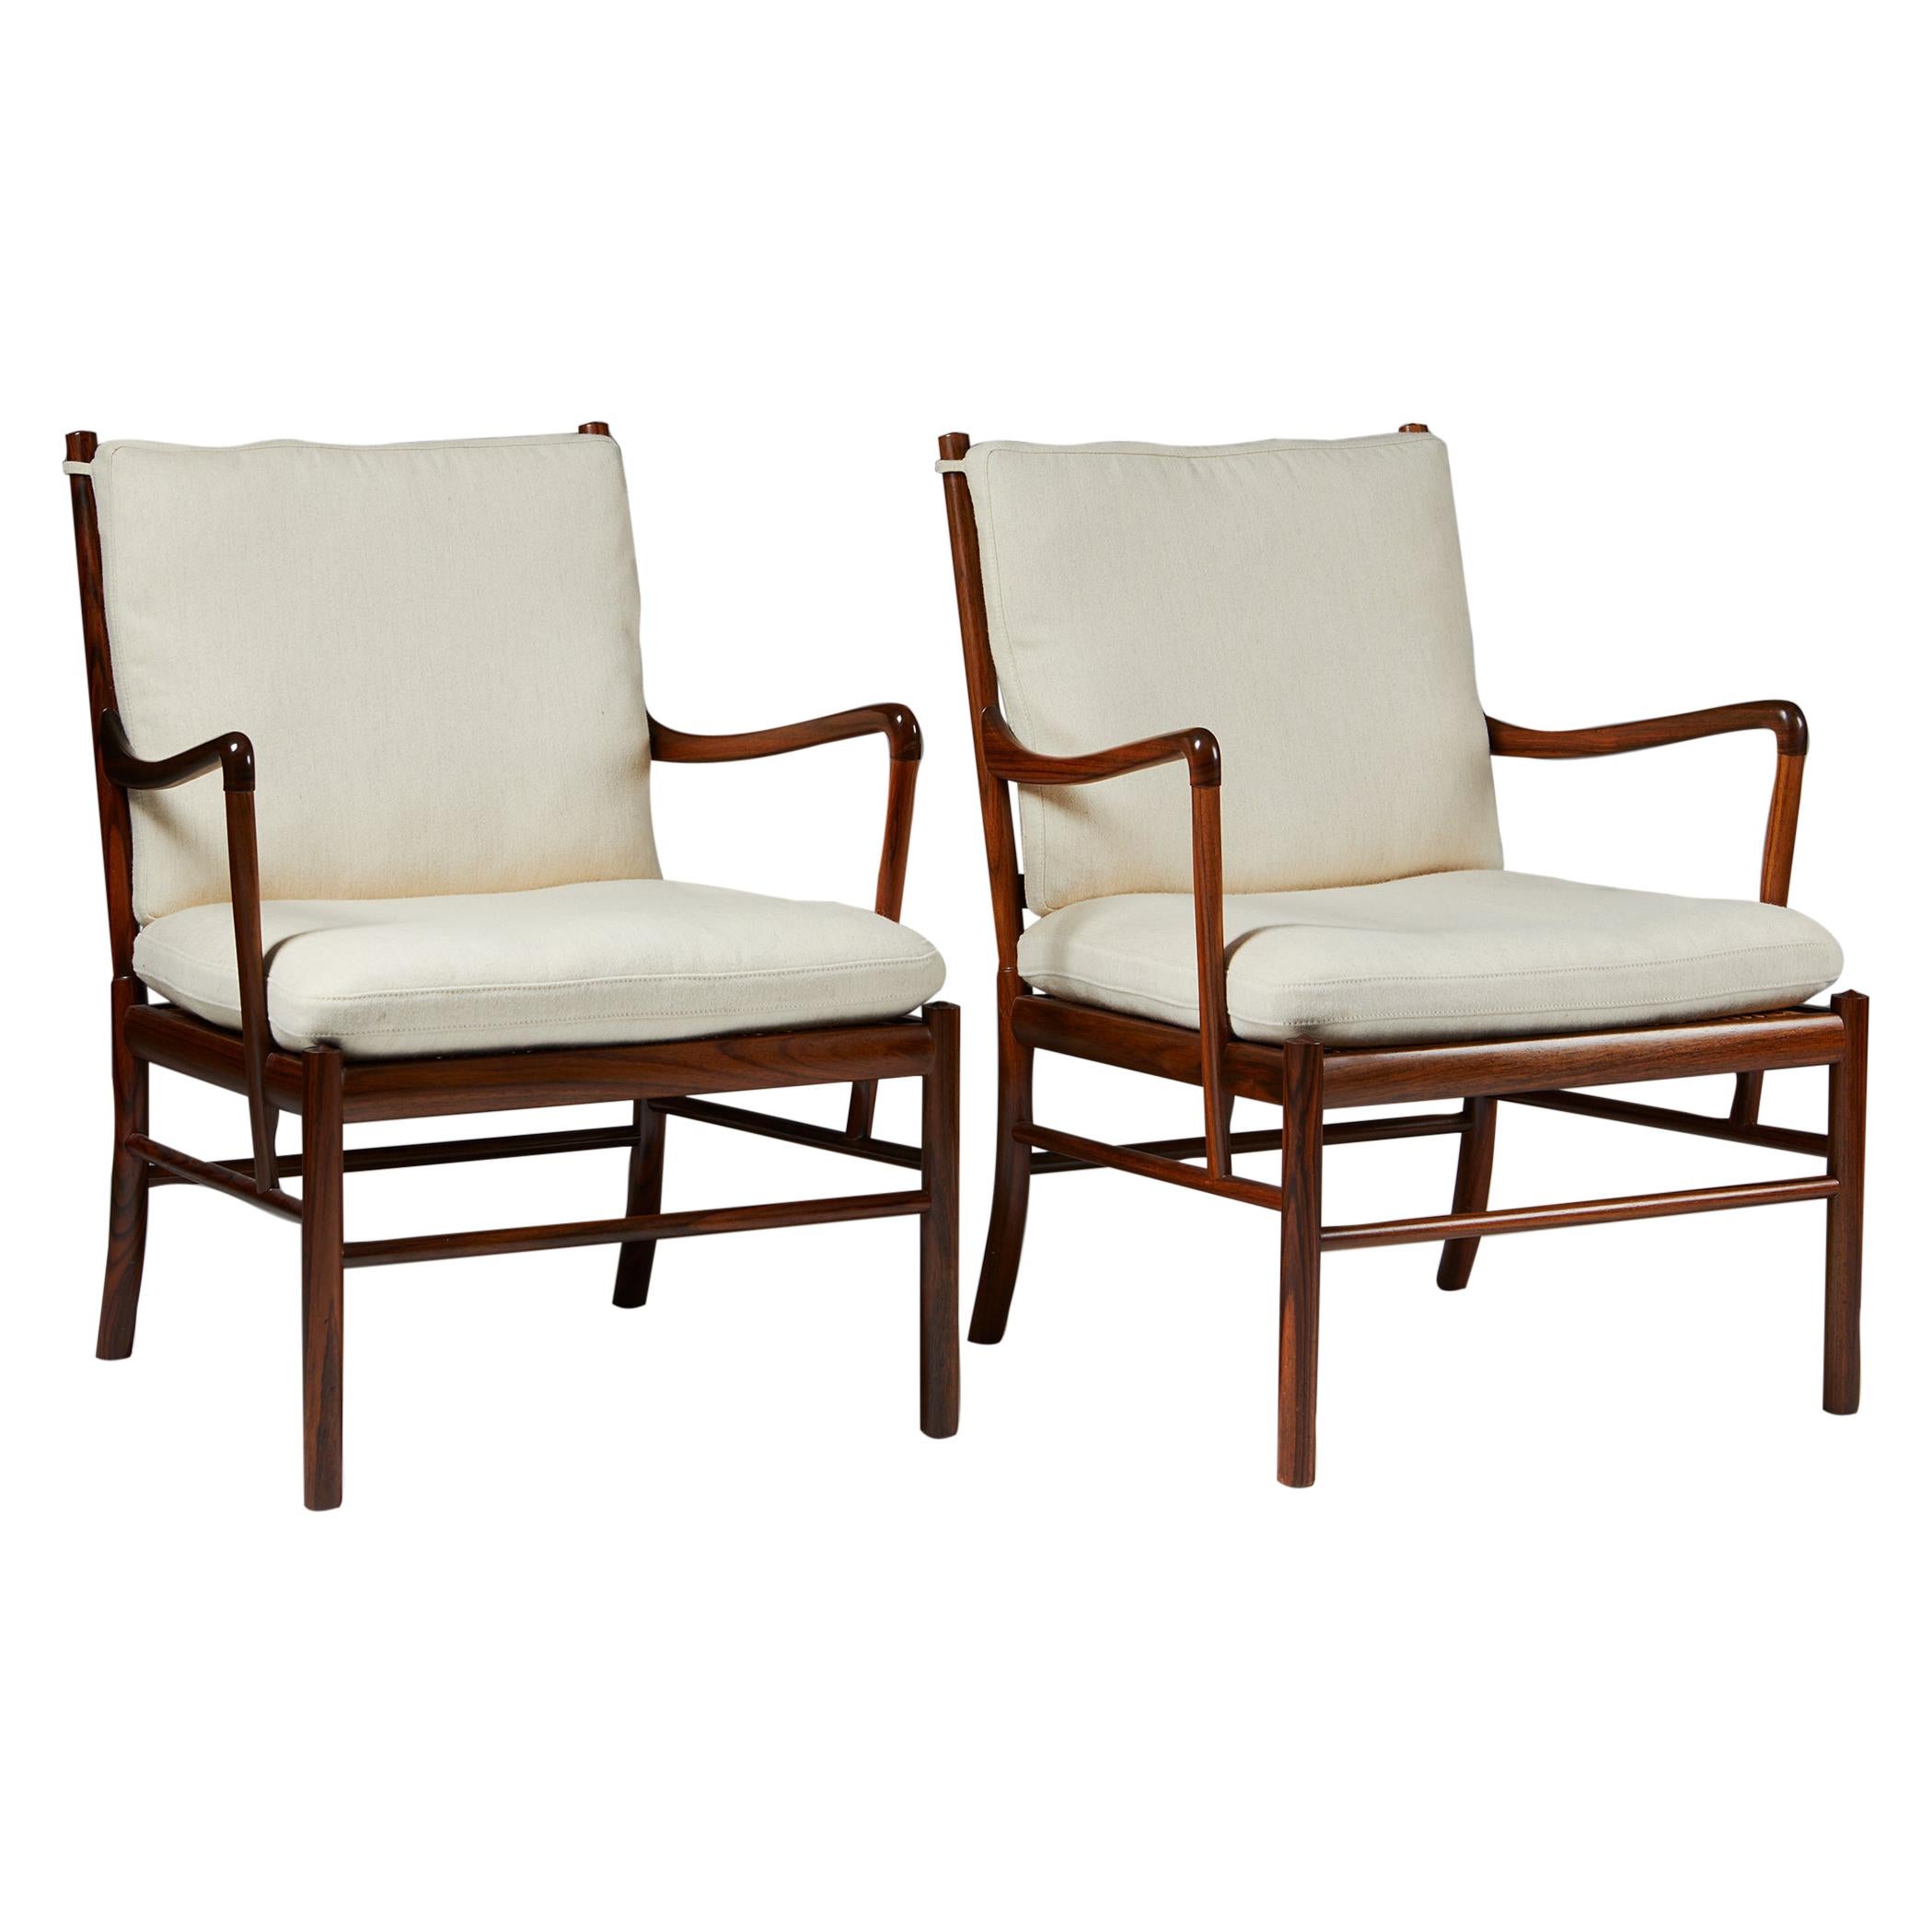 Pair of Armchairs, PJ 149, “Colonial”, Designed by Ole Wanscher for P. Jeppesen